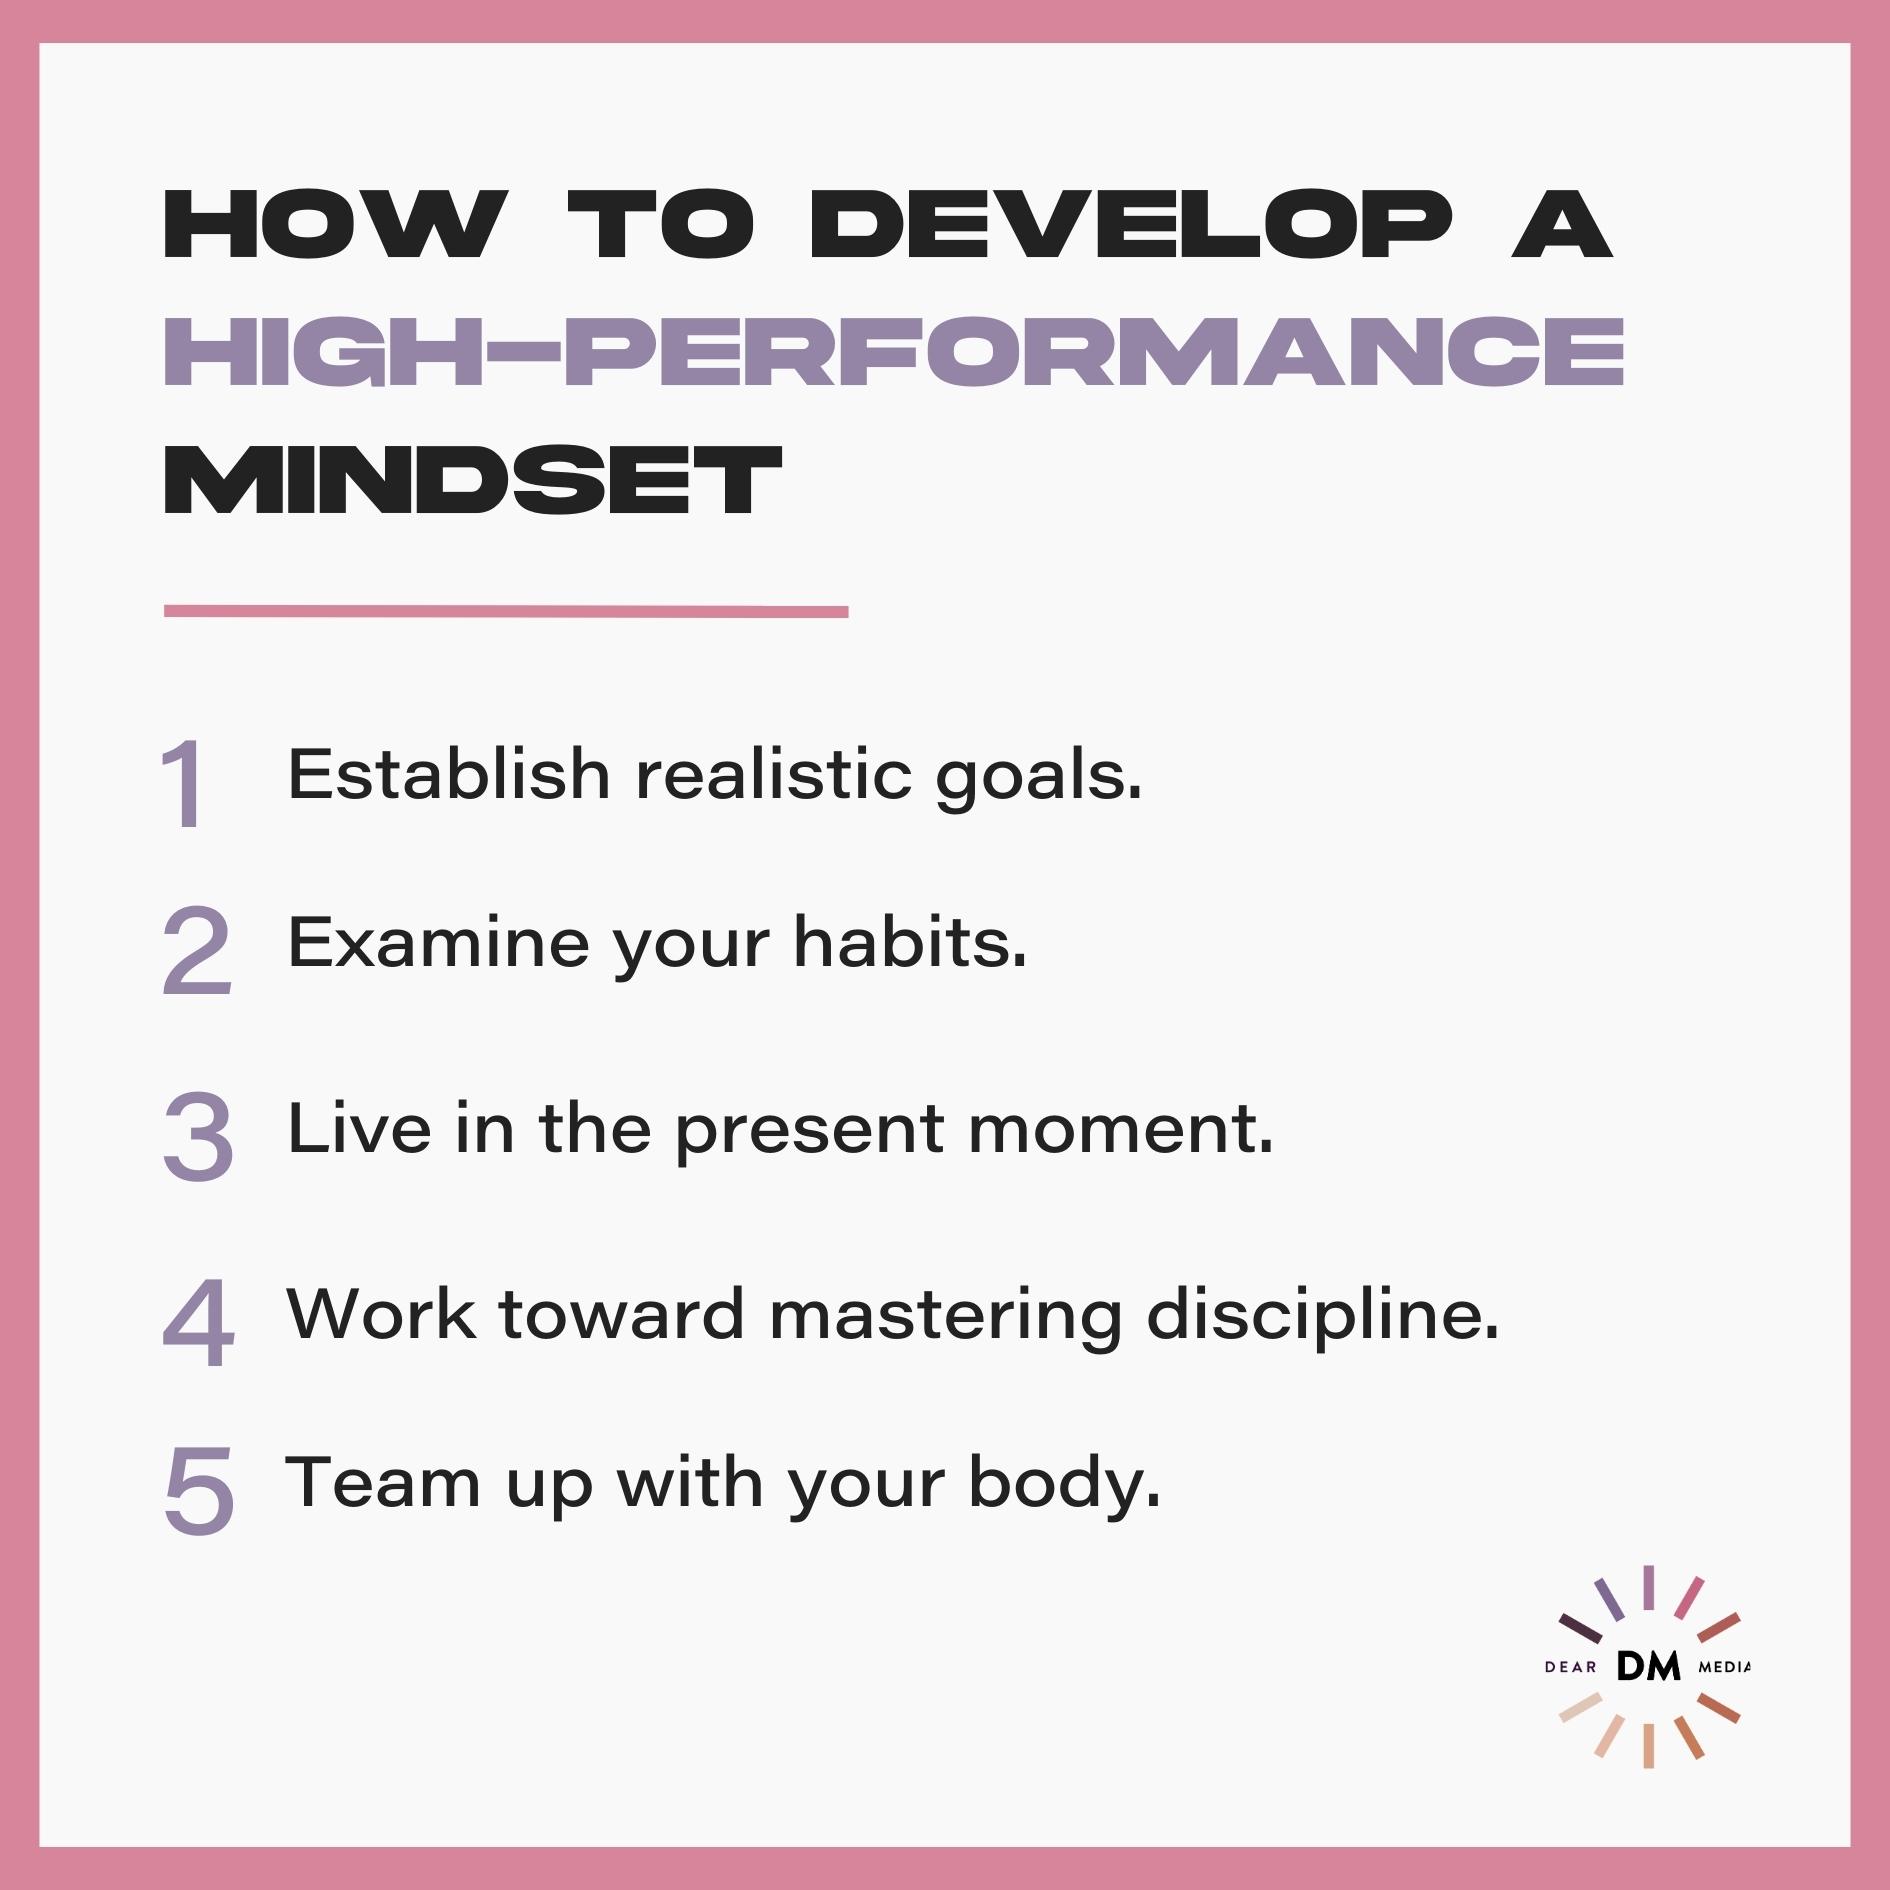 How To Develop A High-Performance Mindset